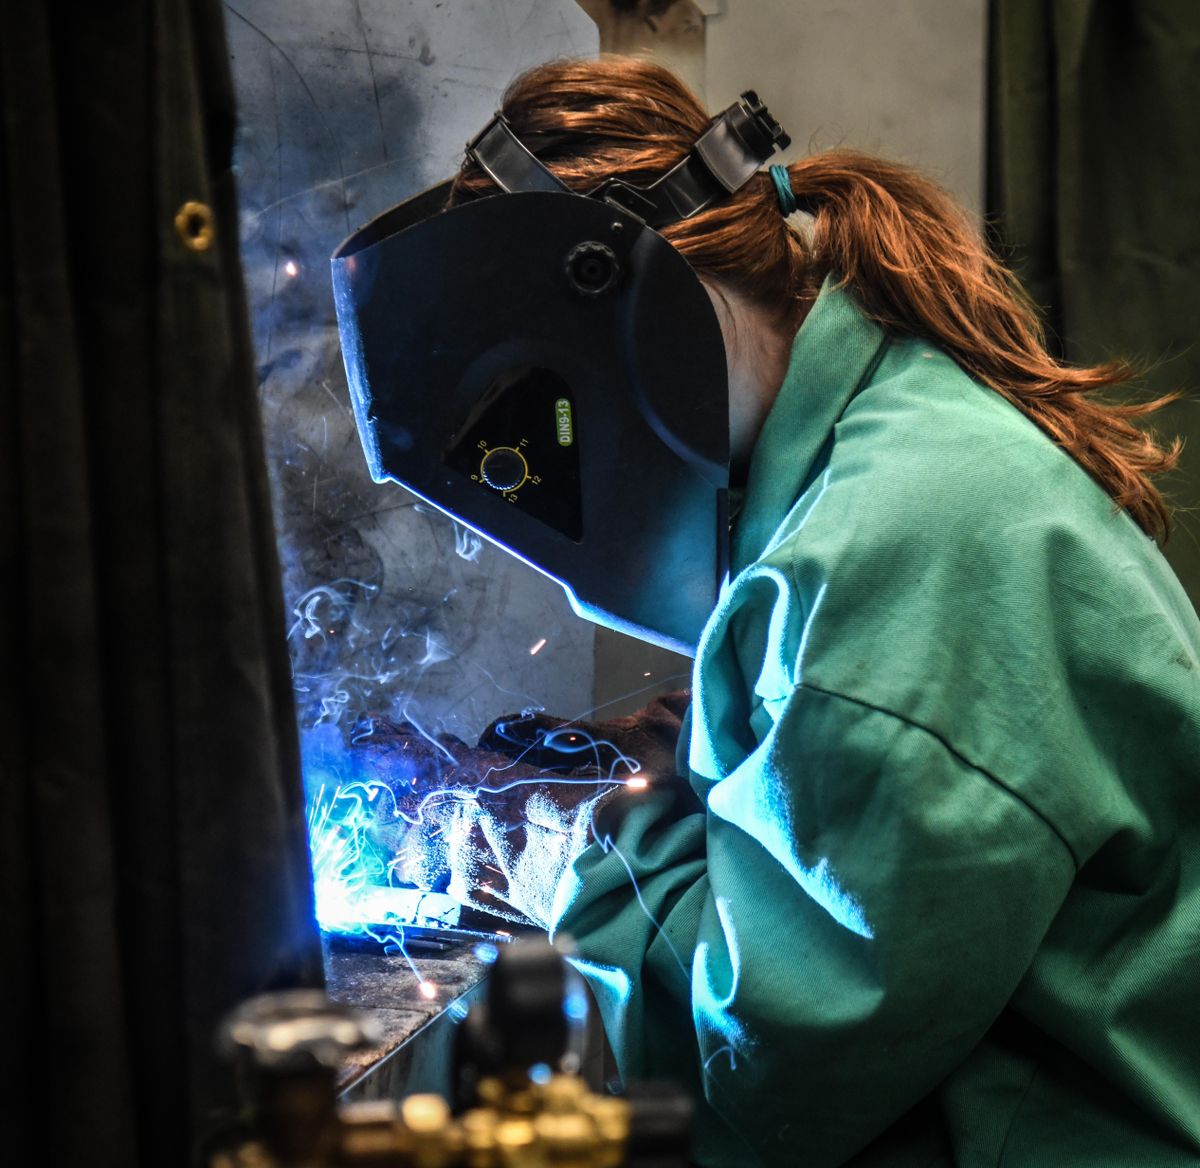 Olivia Perkins demonstrates her welding skills during a class at Shadle Park High School on Friday, Feb. 7, 2020. Thanks to a state program focused on career and technical education, Perkins has received a scholarship to attend Spokane Community College. (Dan Pelle / The Spokesman-Review)